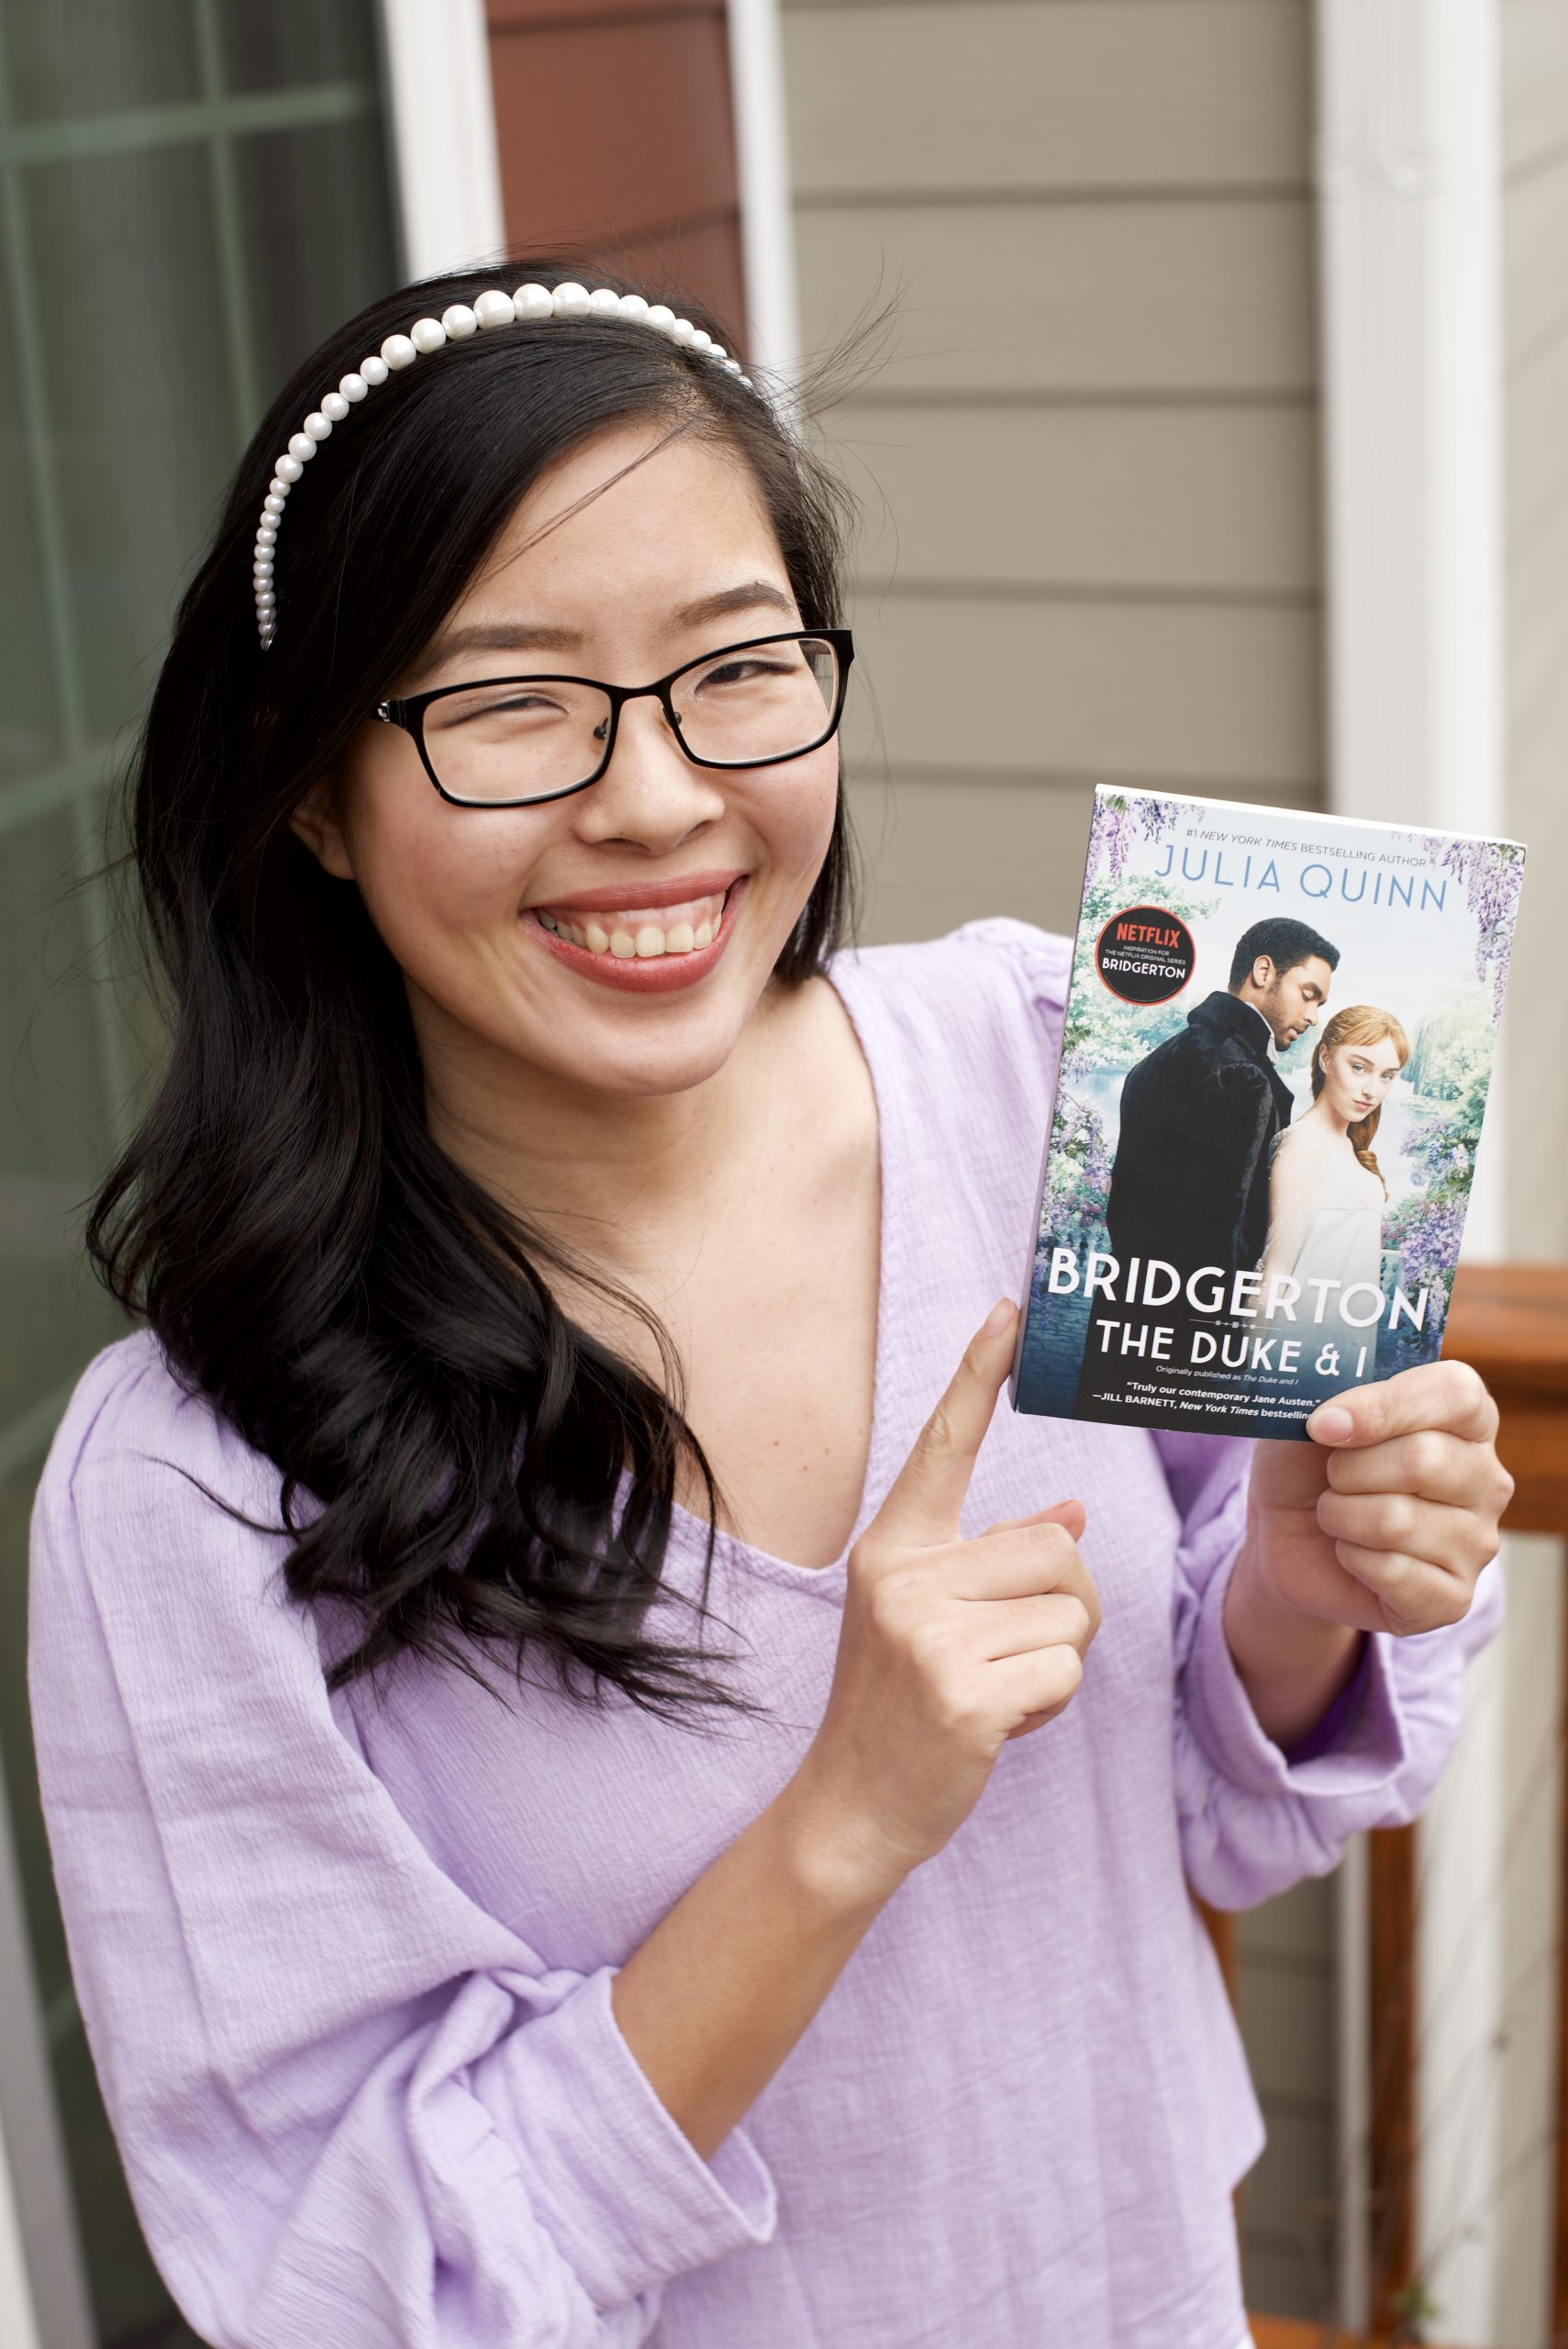 An Asian woman wearing a lilac shirt and pearl headband holding the first book of Bridgerton Series "The Duke and I" by Julia Quinn.